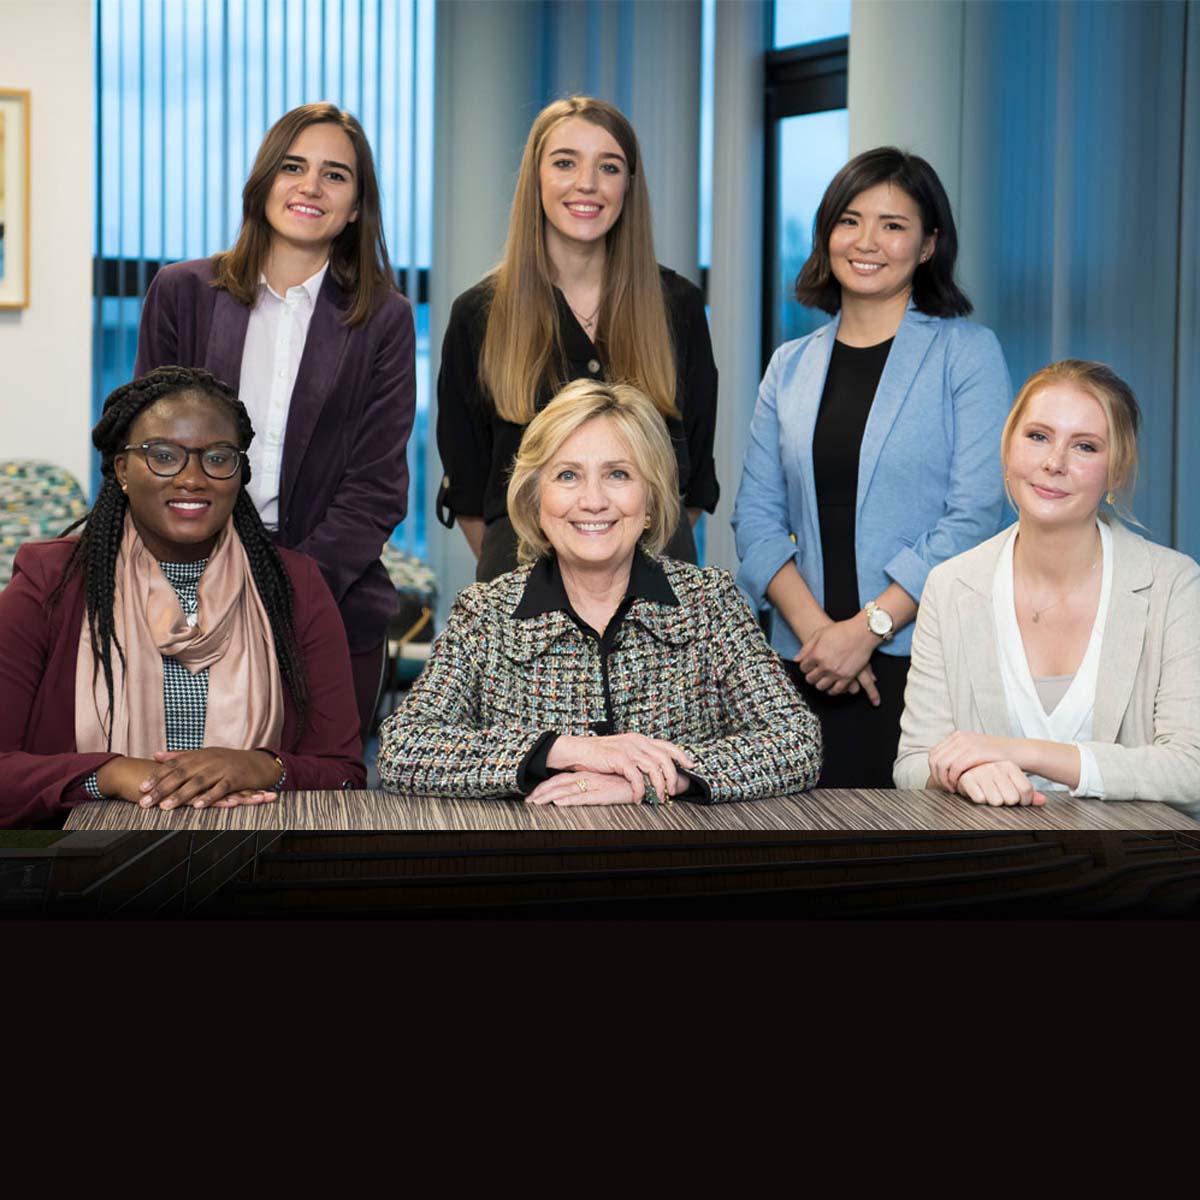 Hillary Clinton and the scholars